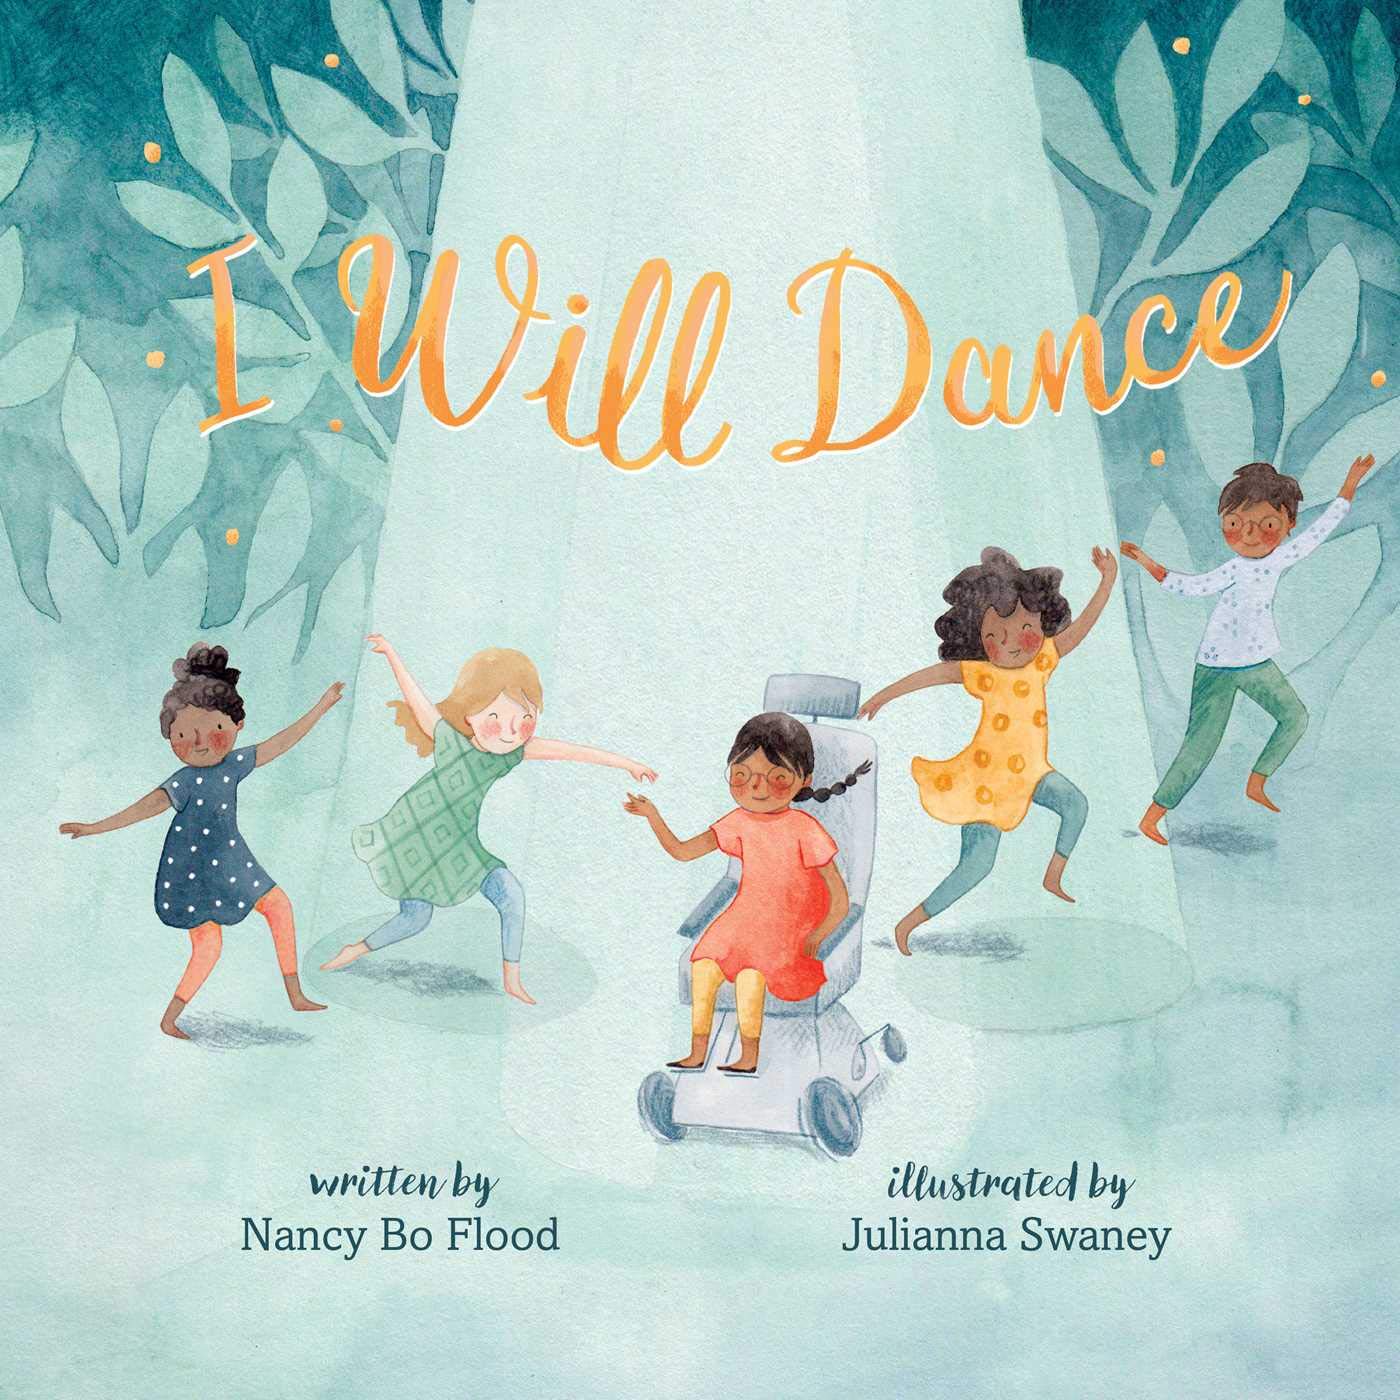 Cover for "I Will Dance"